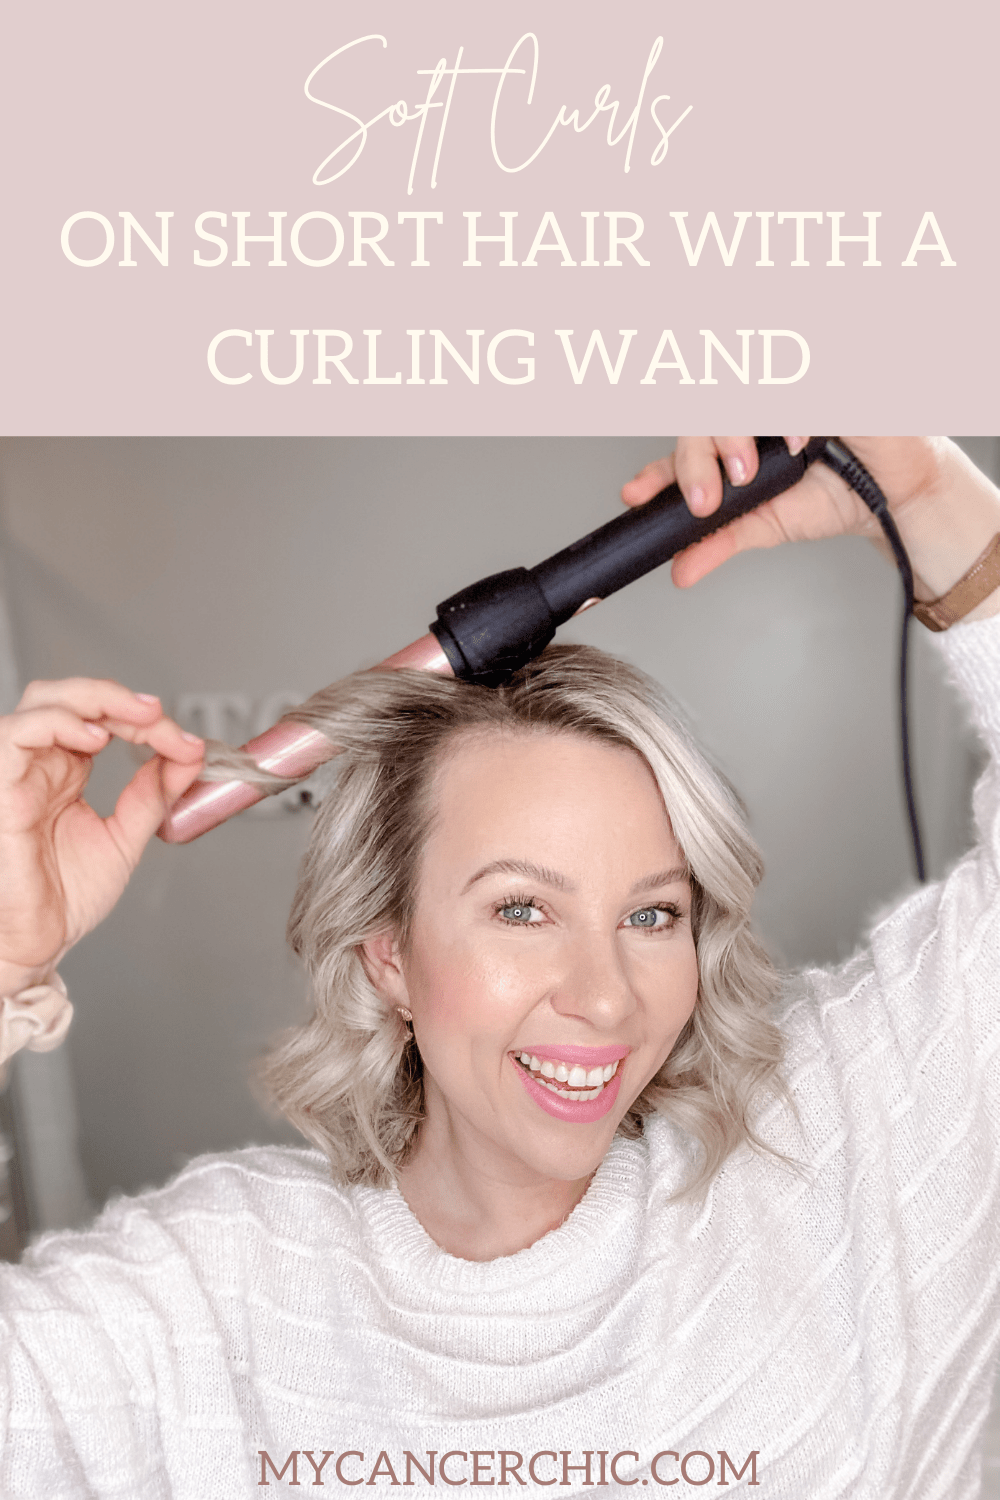 Easy Soft Waves Using a Curling Wand on Short Hair - My Cancer Chic